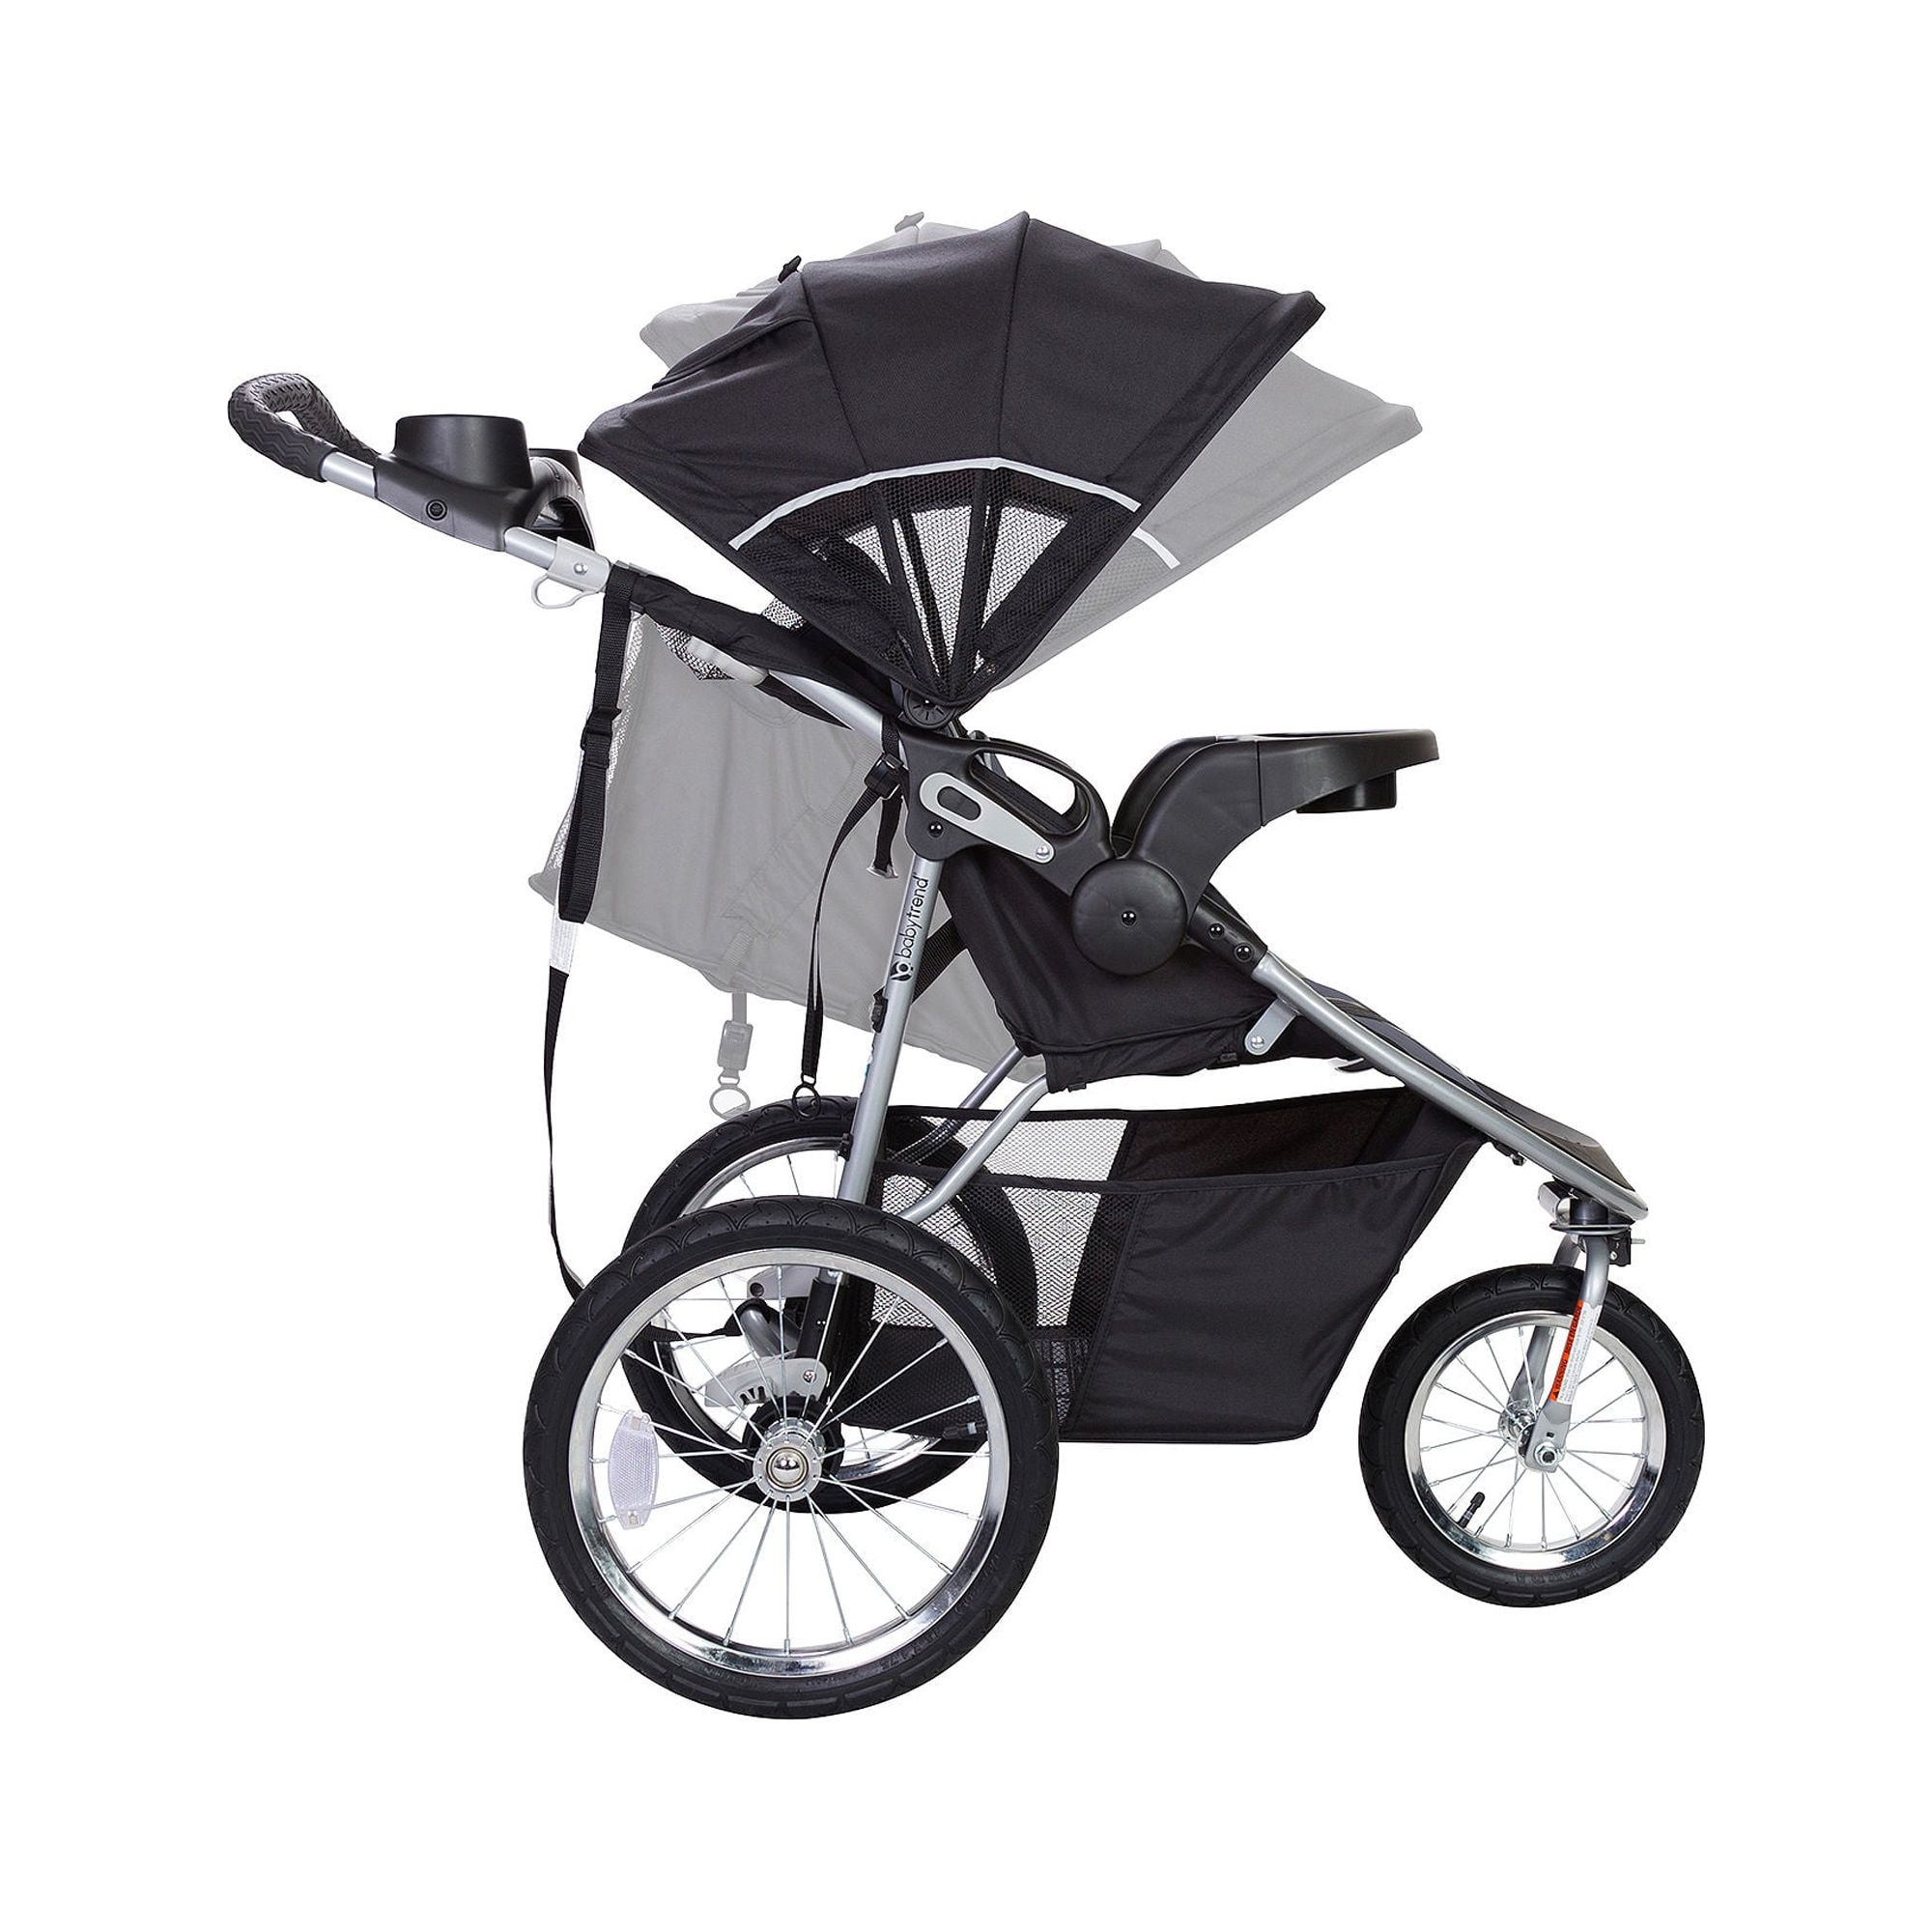 Baby Trend Pathway 35 Jogger Travel System, Optic Grey - image 4 of 4